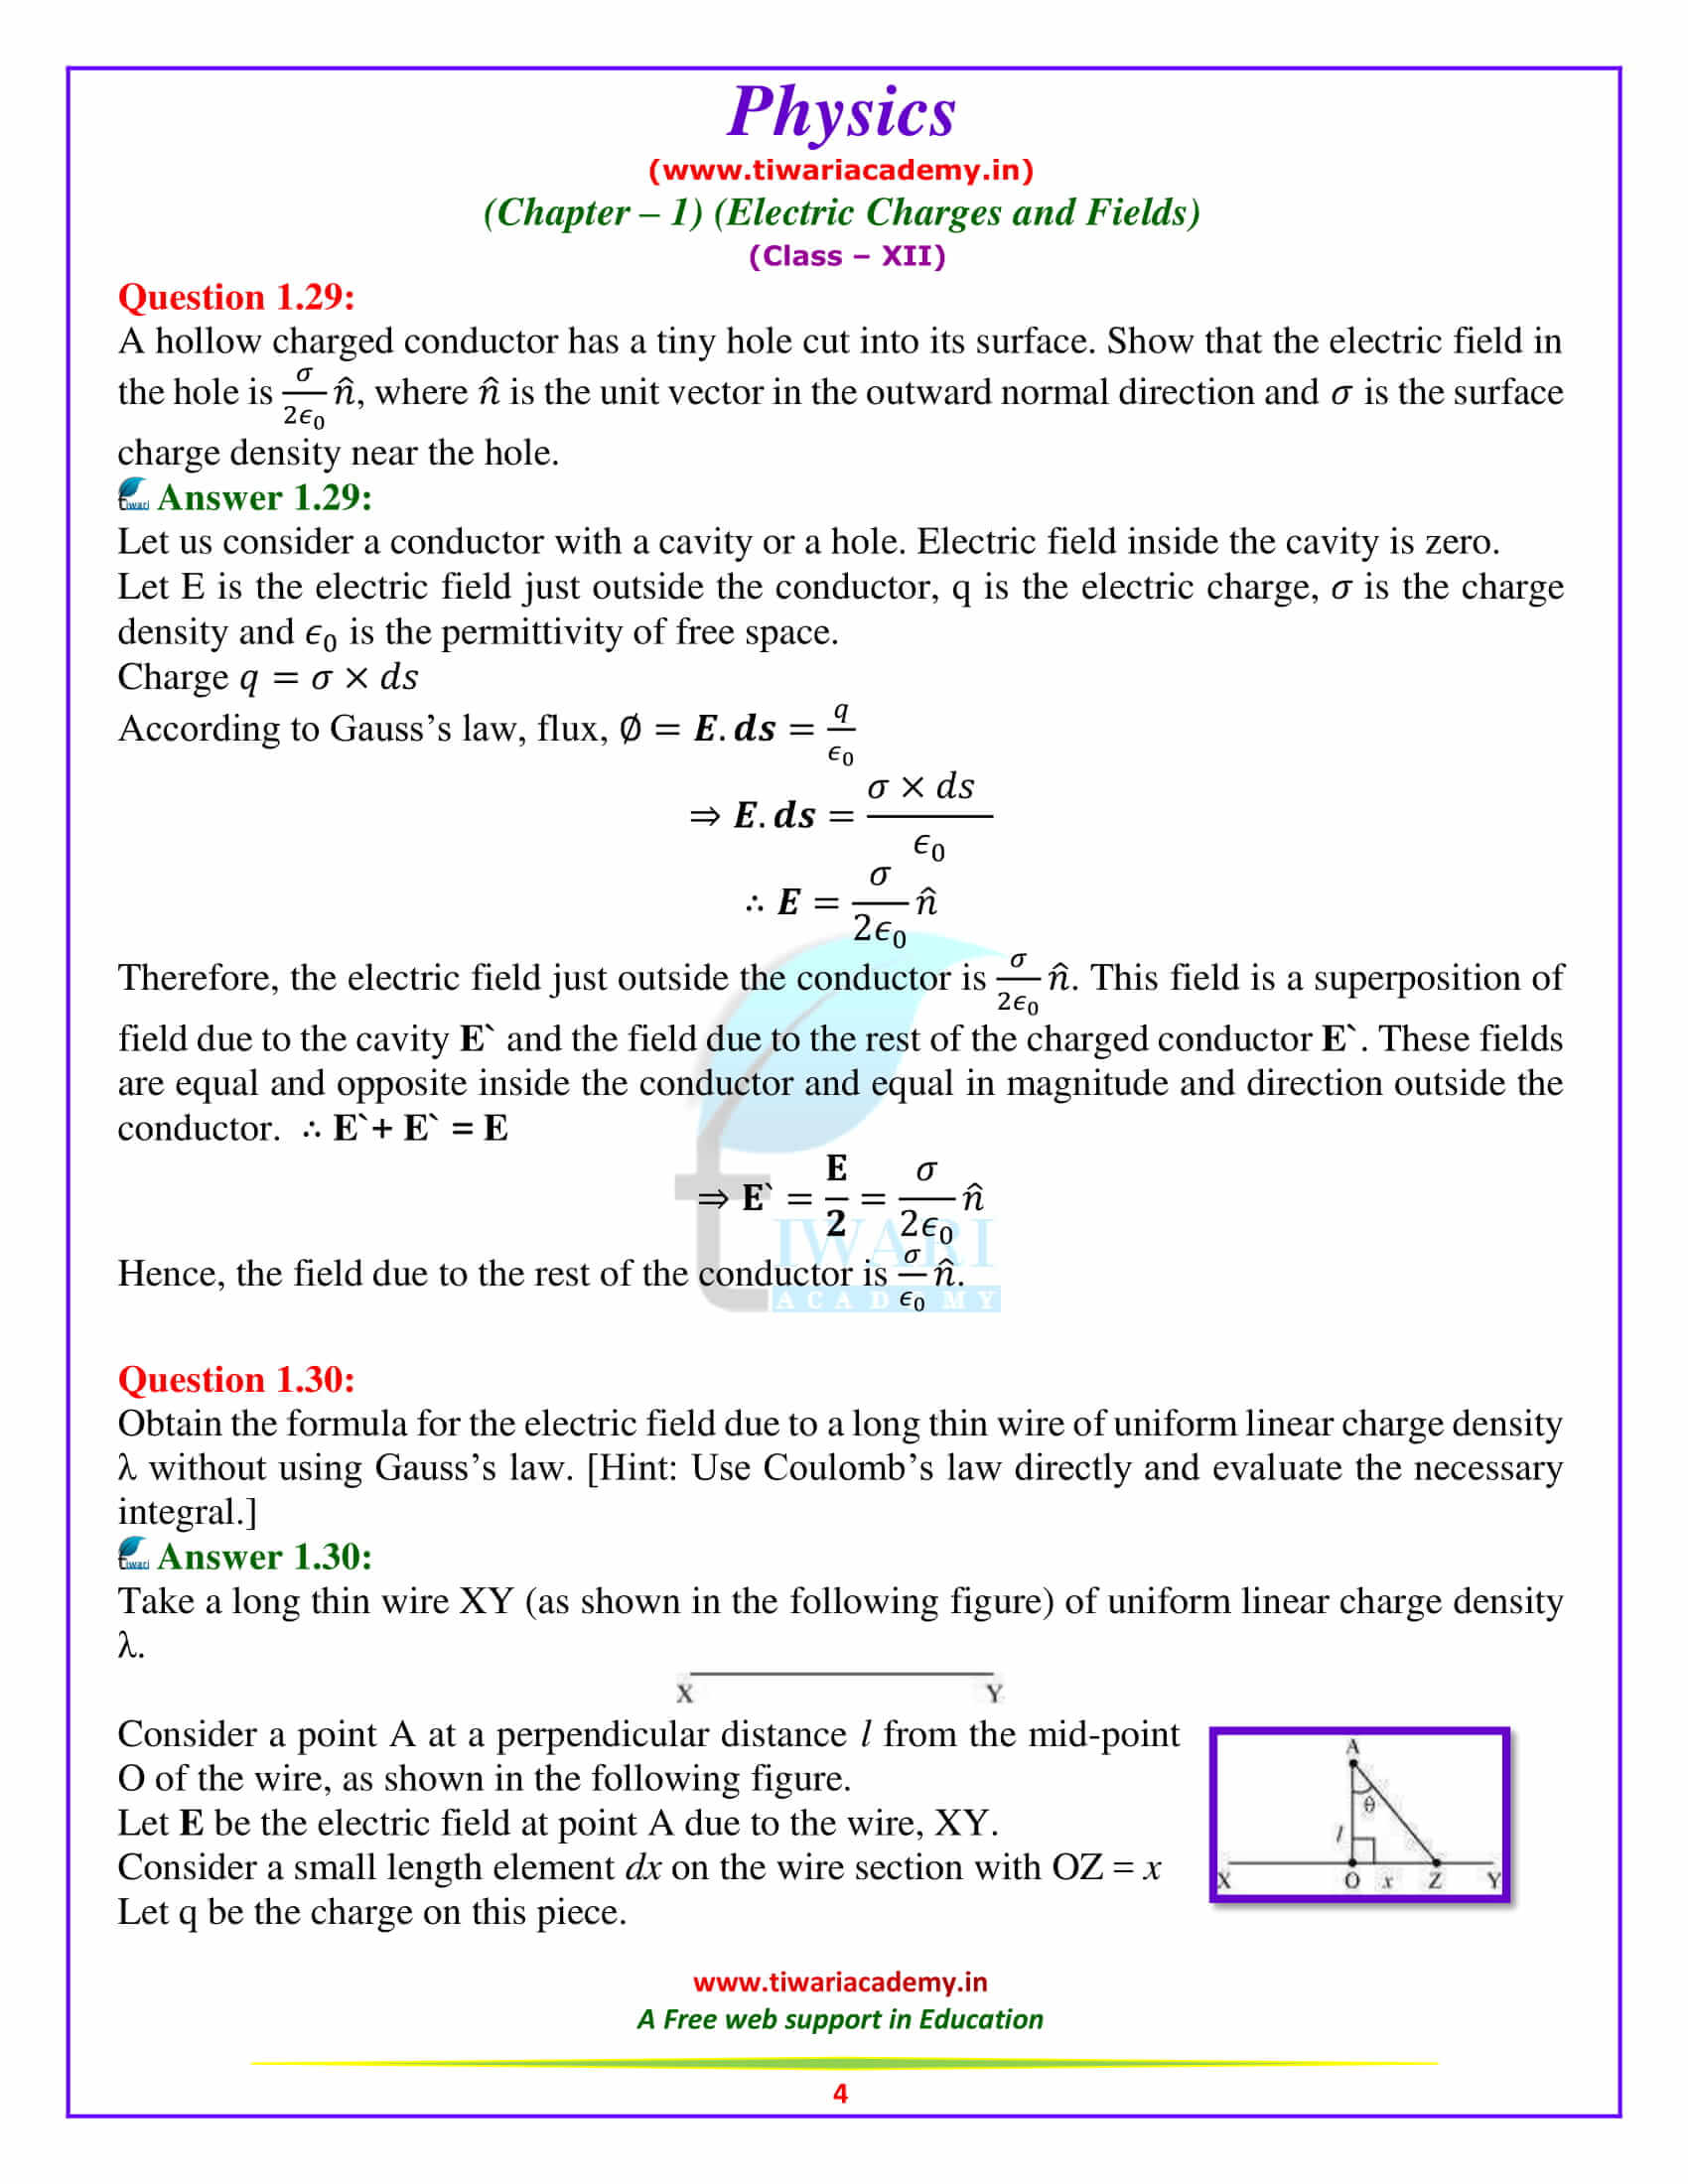 12 Physics chapter 1 Solutions additional exercises in english medium free